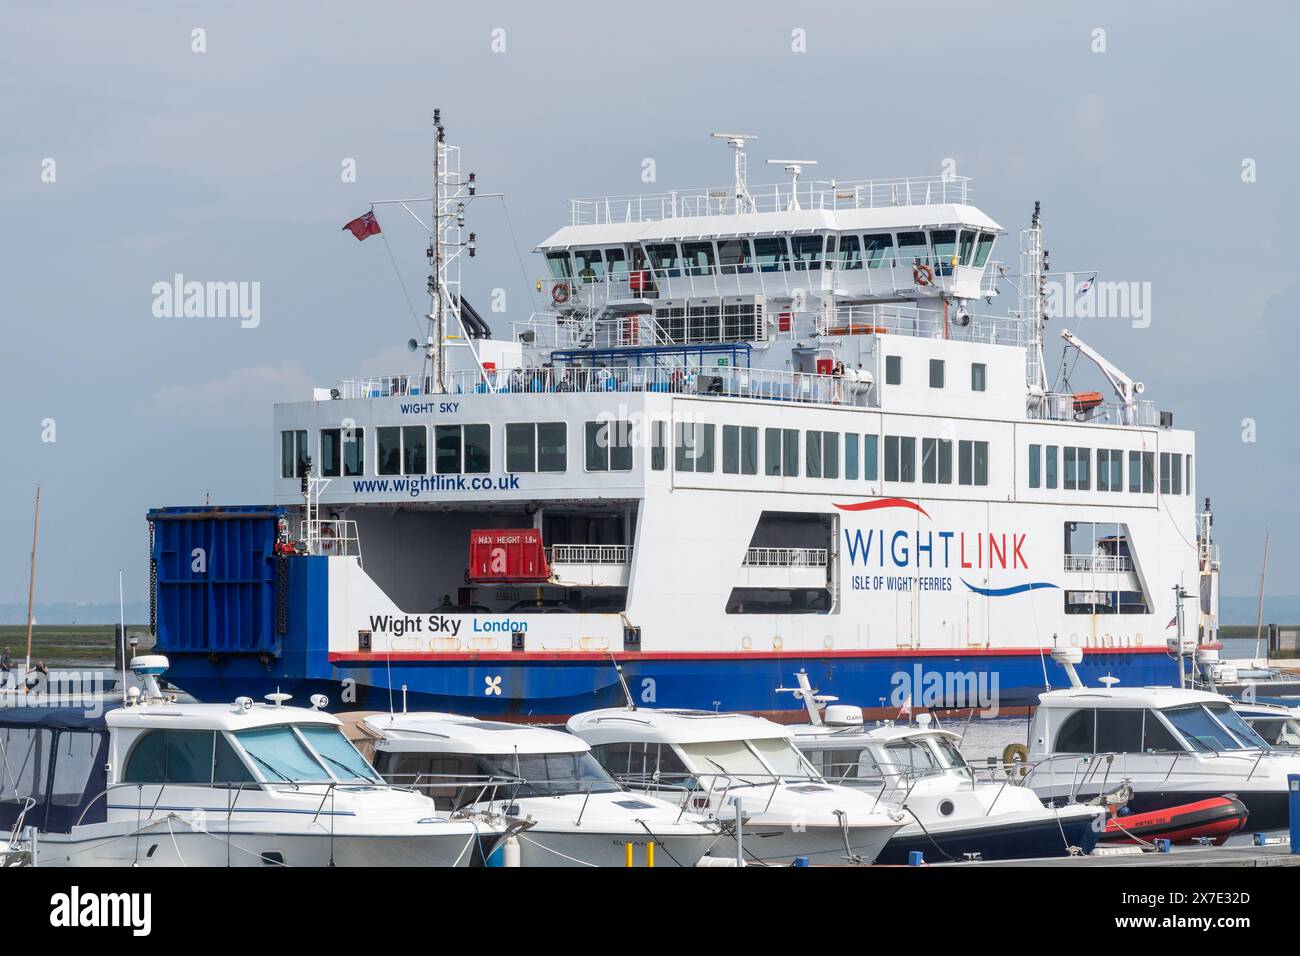 WightLink car ferry coming in to Lymington Ferry Terminus, Hampshire, England, UK. The ferry transports cars and passengers to and from Yarmouth, IOW. Stock Photo